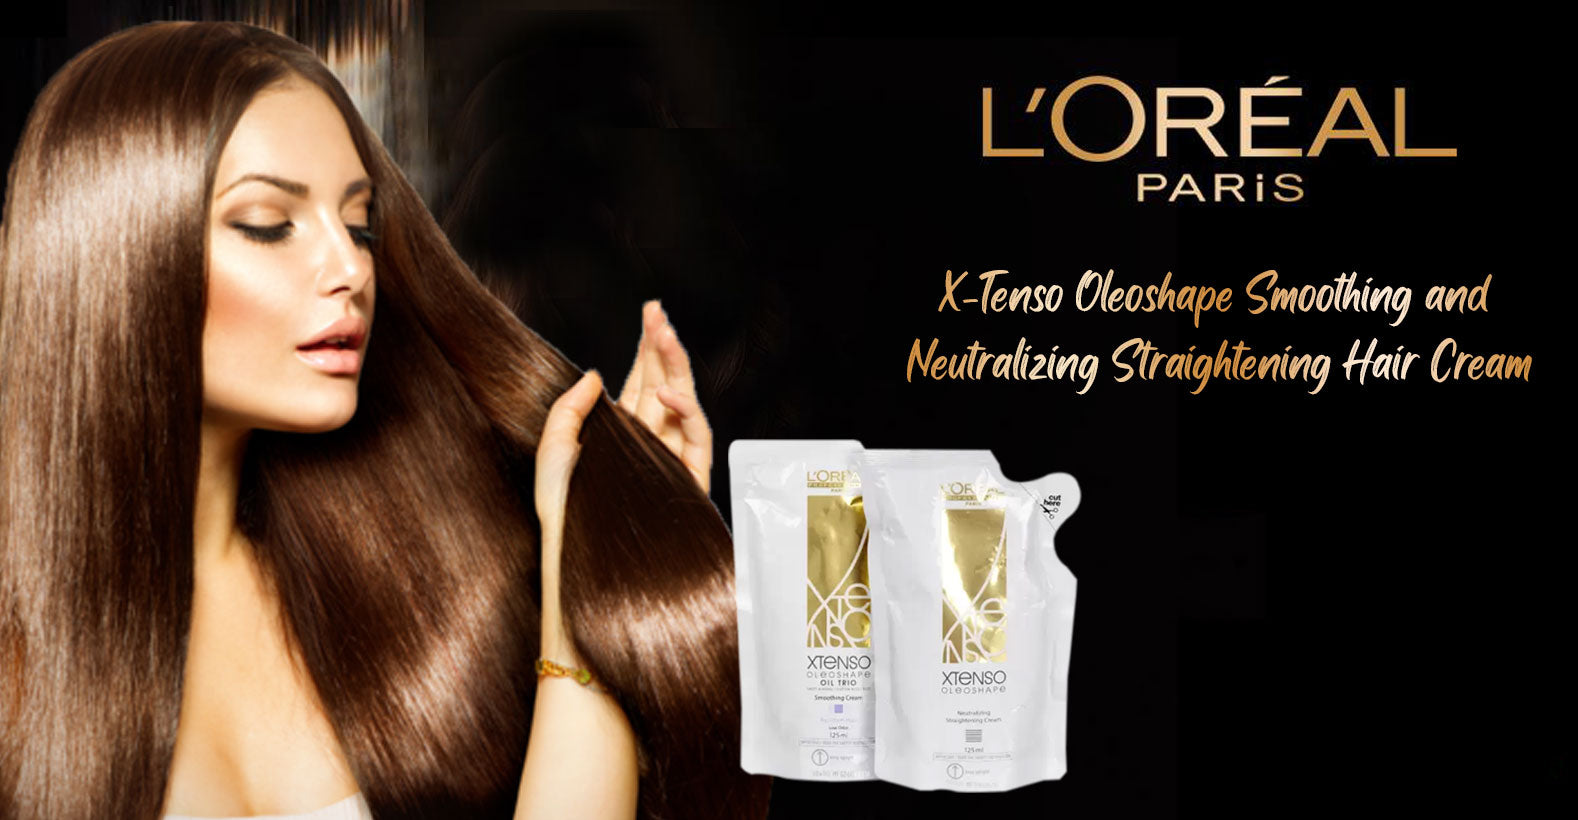 LOREAL Xtenso Resistance and Extra Resistance Differences